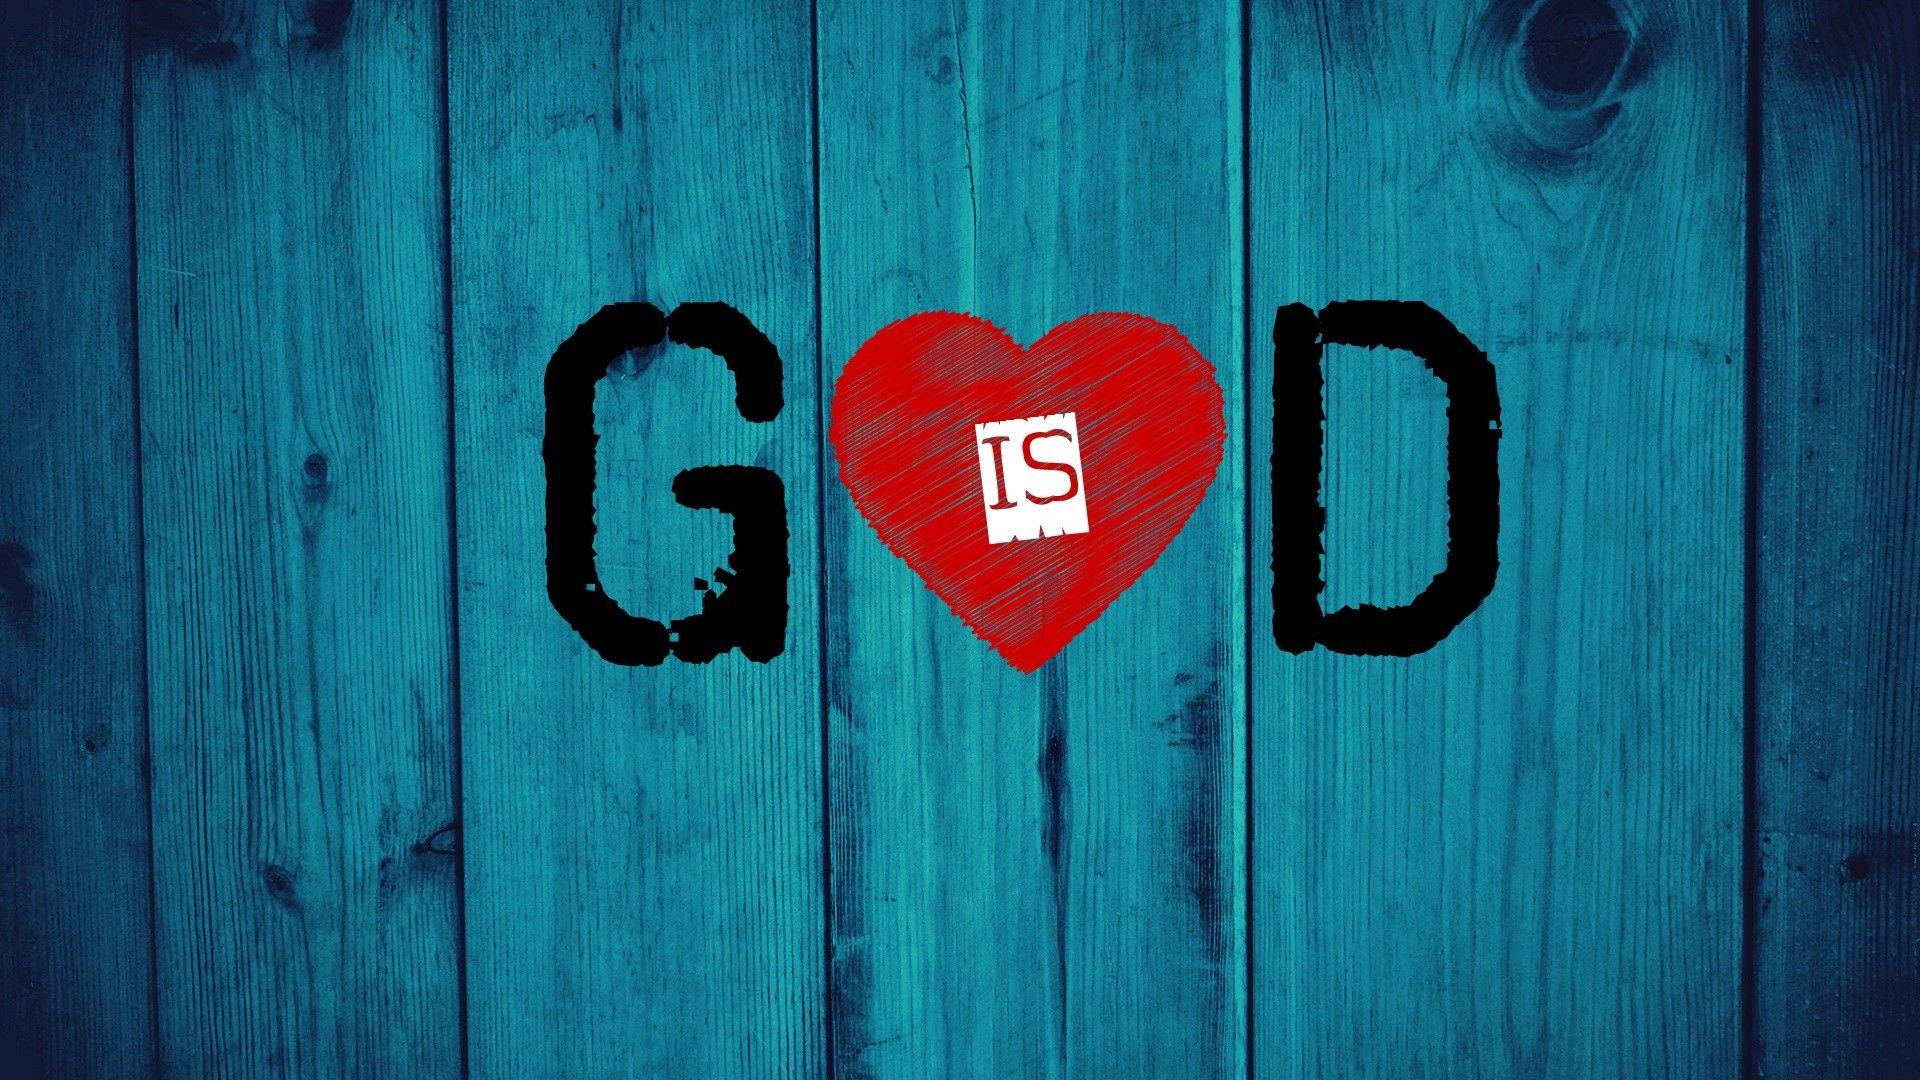 Wallpaper, 1920x1080 px, blue electric, Christianity, God Is Love